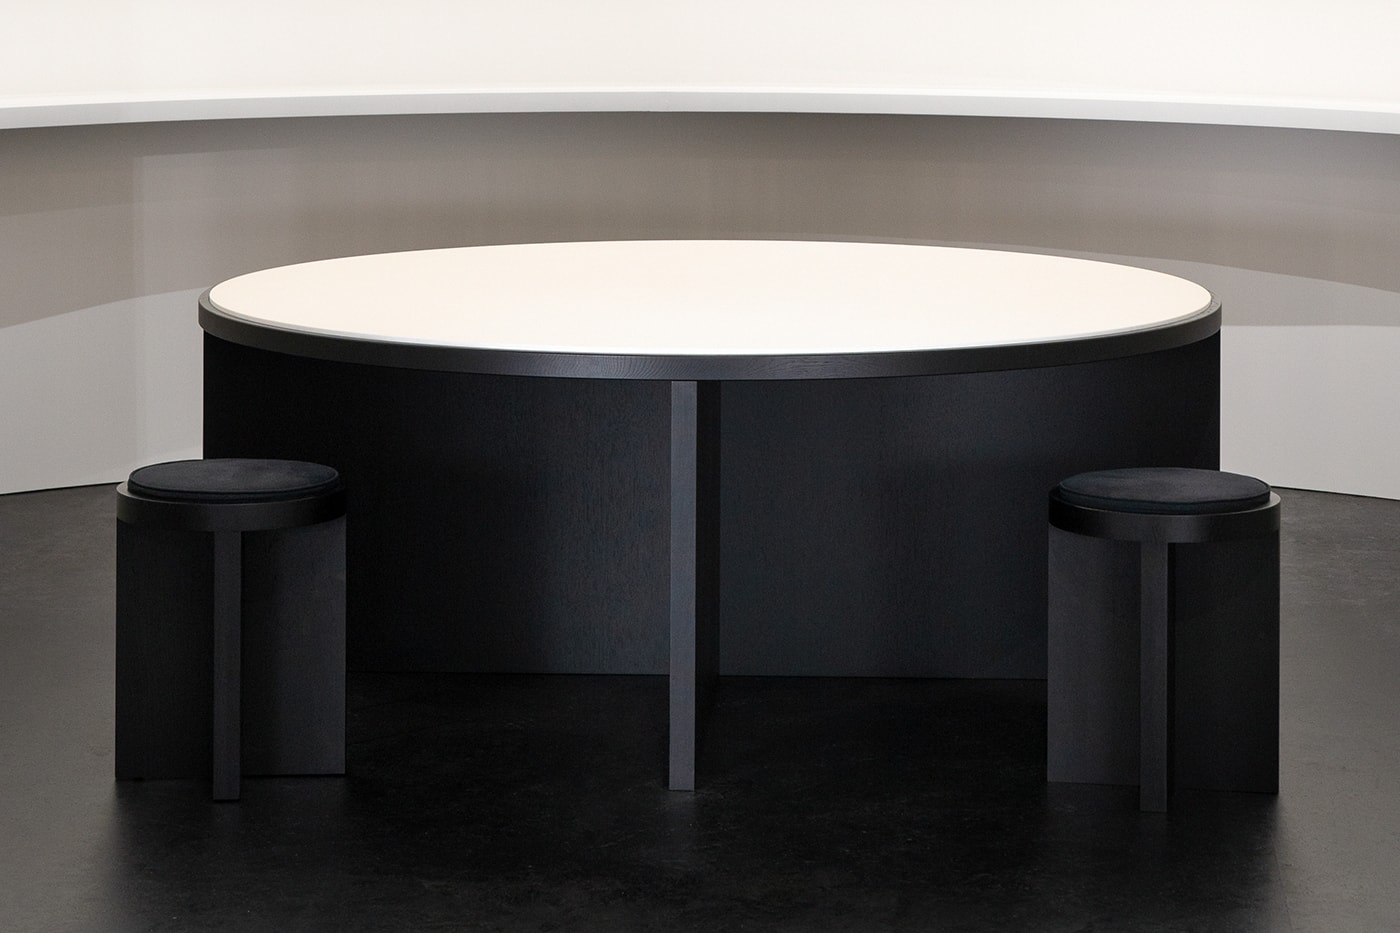 Ann Demeulemeester Turns Her Focus to Furniture